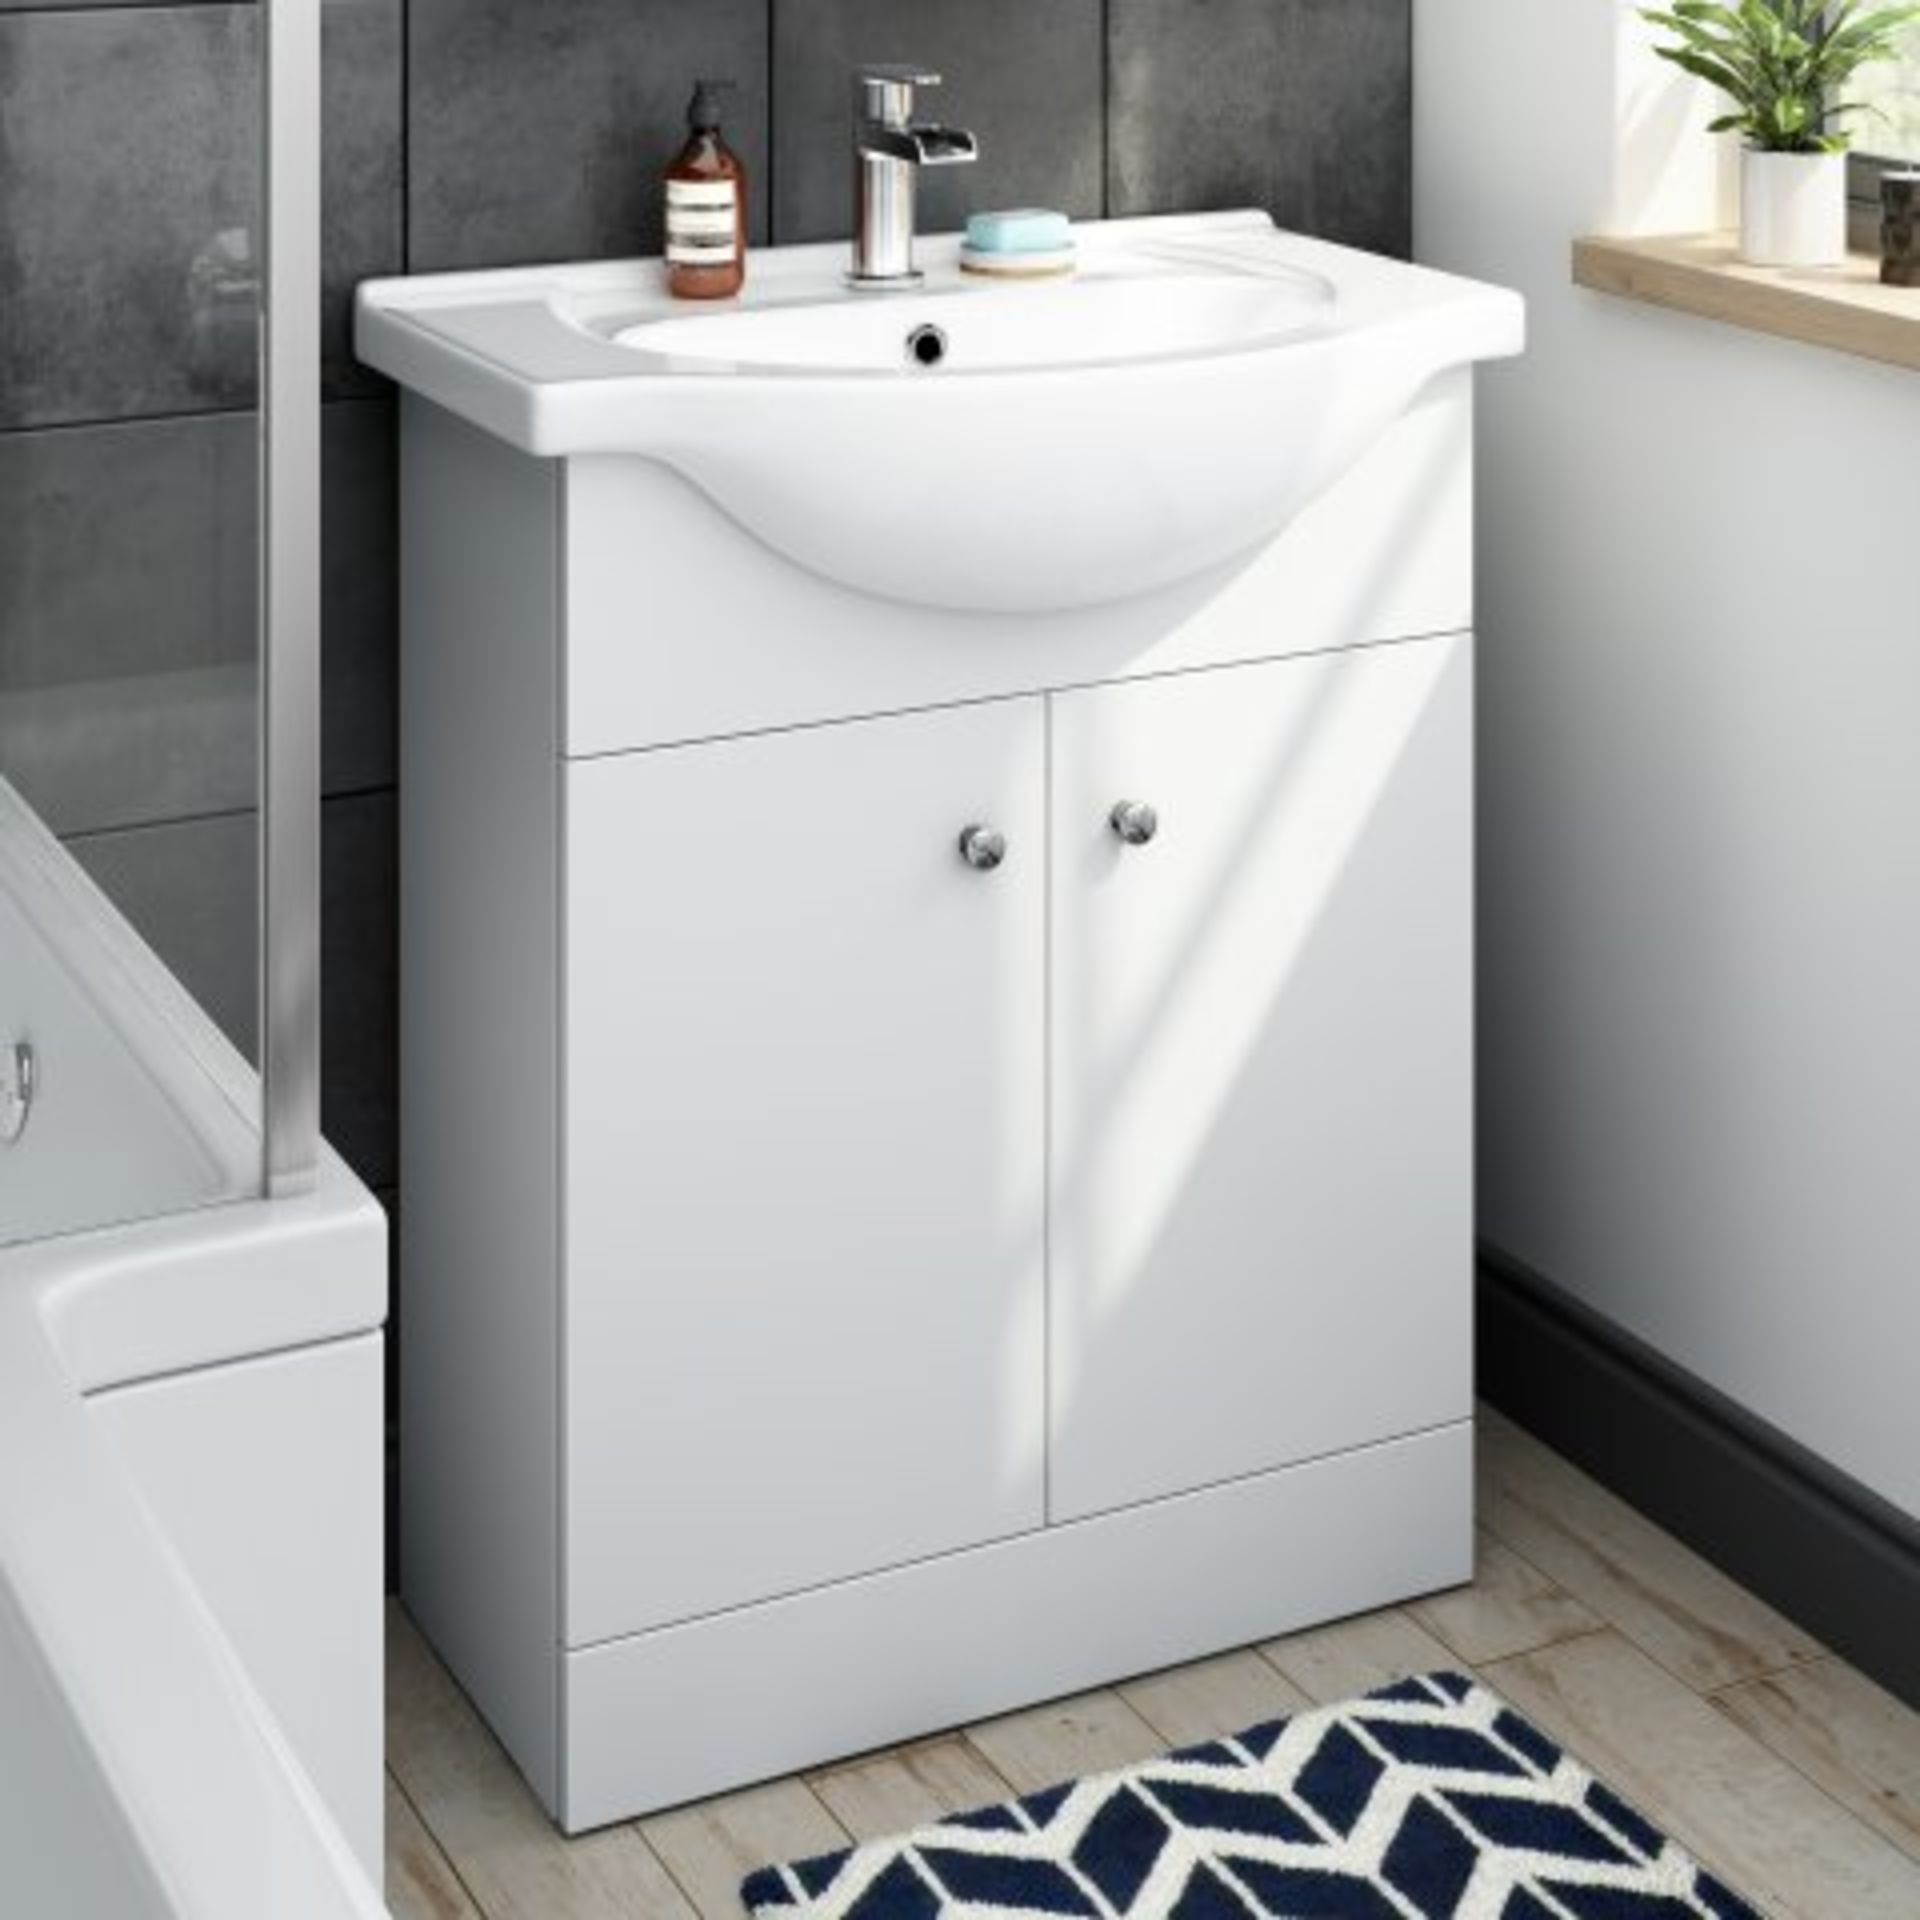 (M6) 650mm Blanc Matte White Basin Cabinet. COMES COMPLETE WITH BASIN. This stylish bathroom